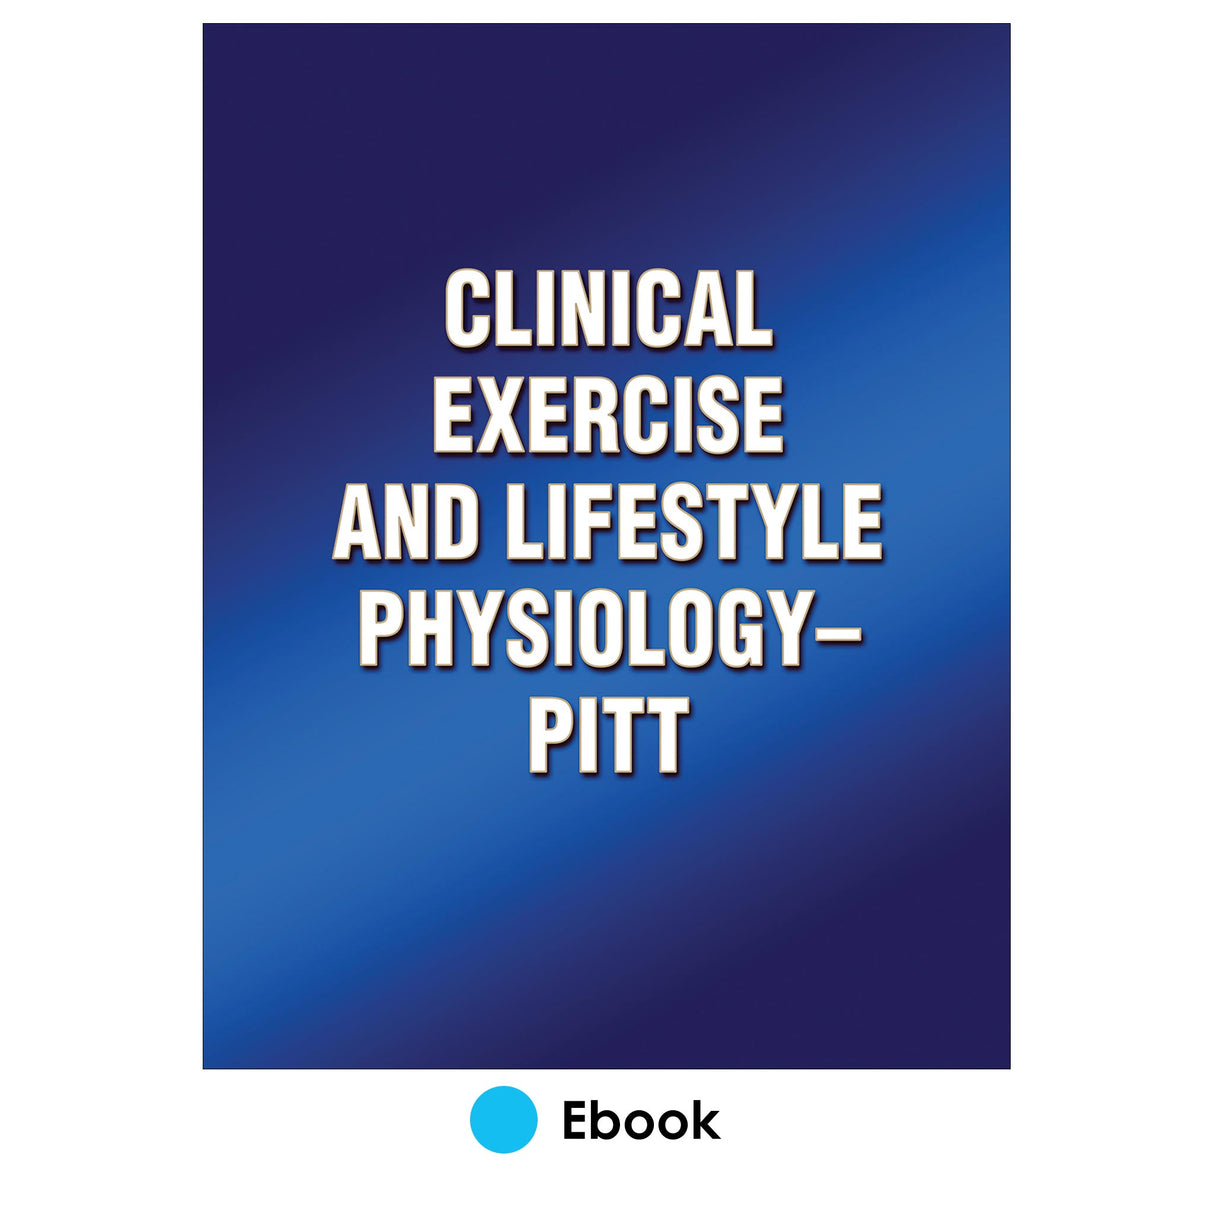 Clinical Exercise and Lifestyle Physiology-Pitt